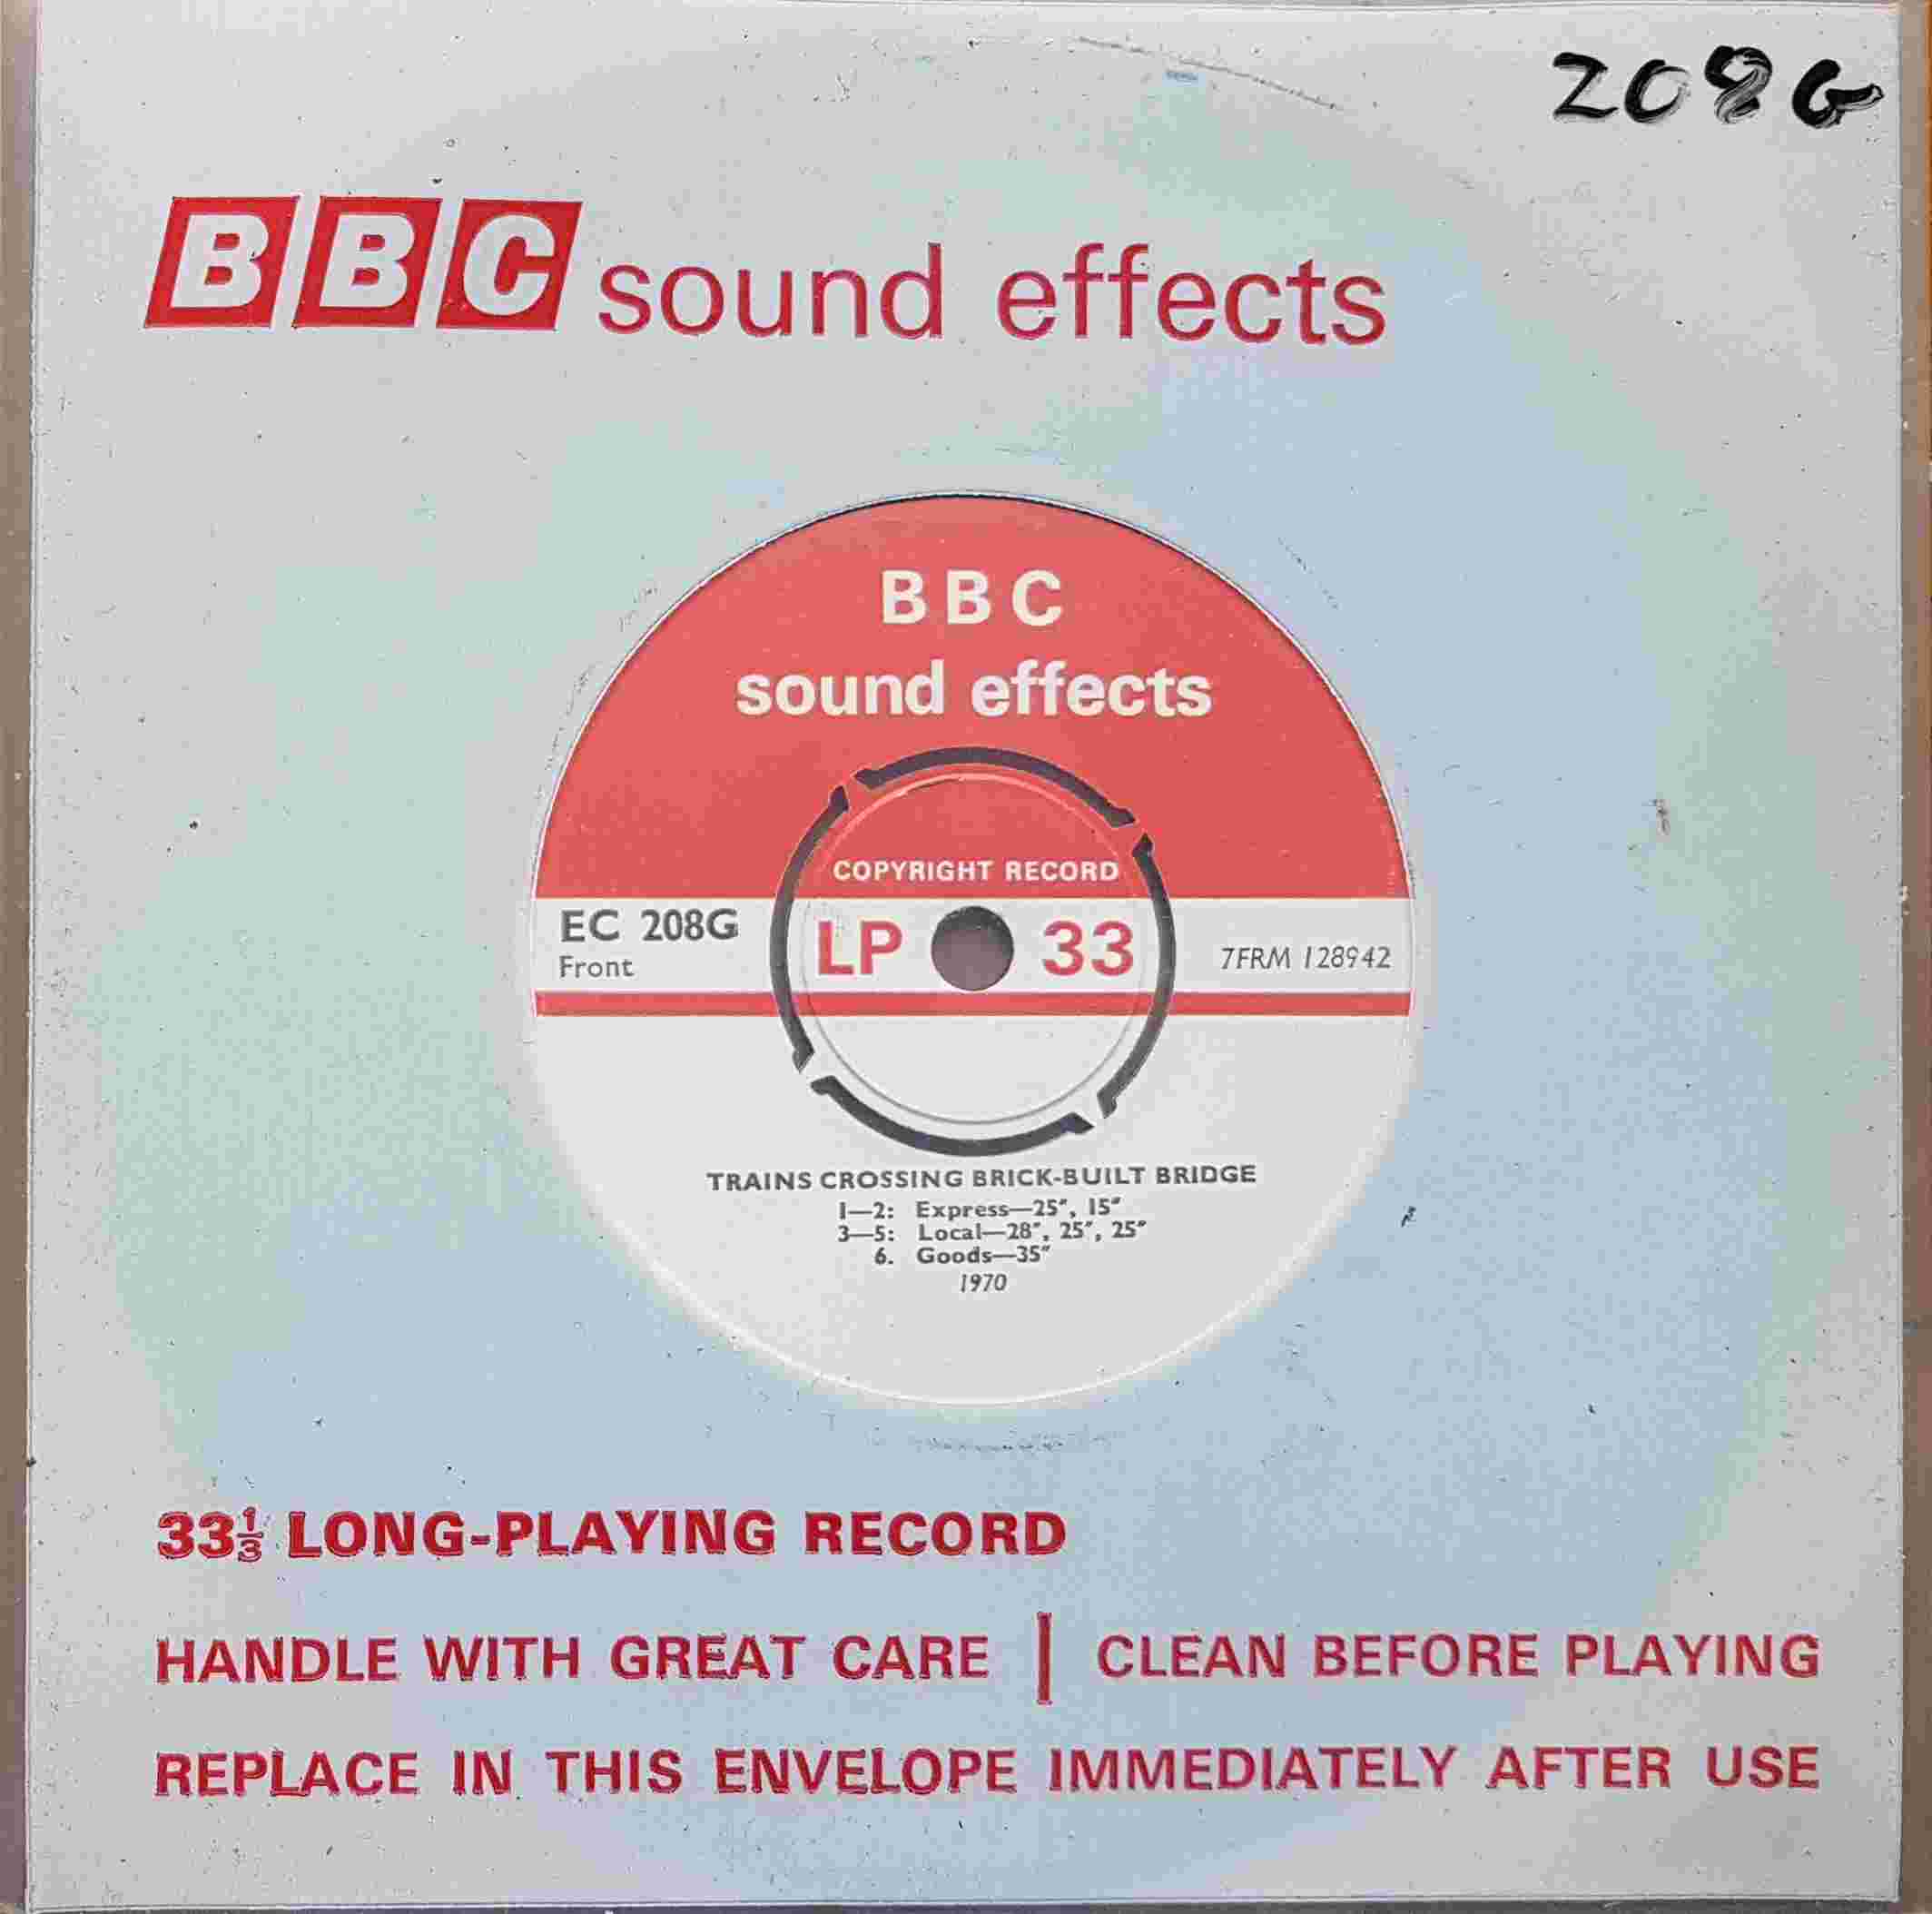 Picture of EC 208G Trains crossing brick-built / Metal bridges by artist Not registered from the BBC singles - Records and Tapes library